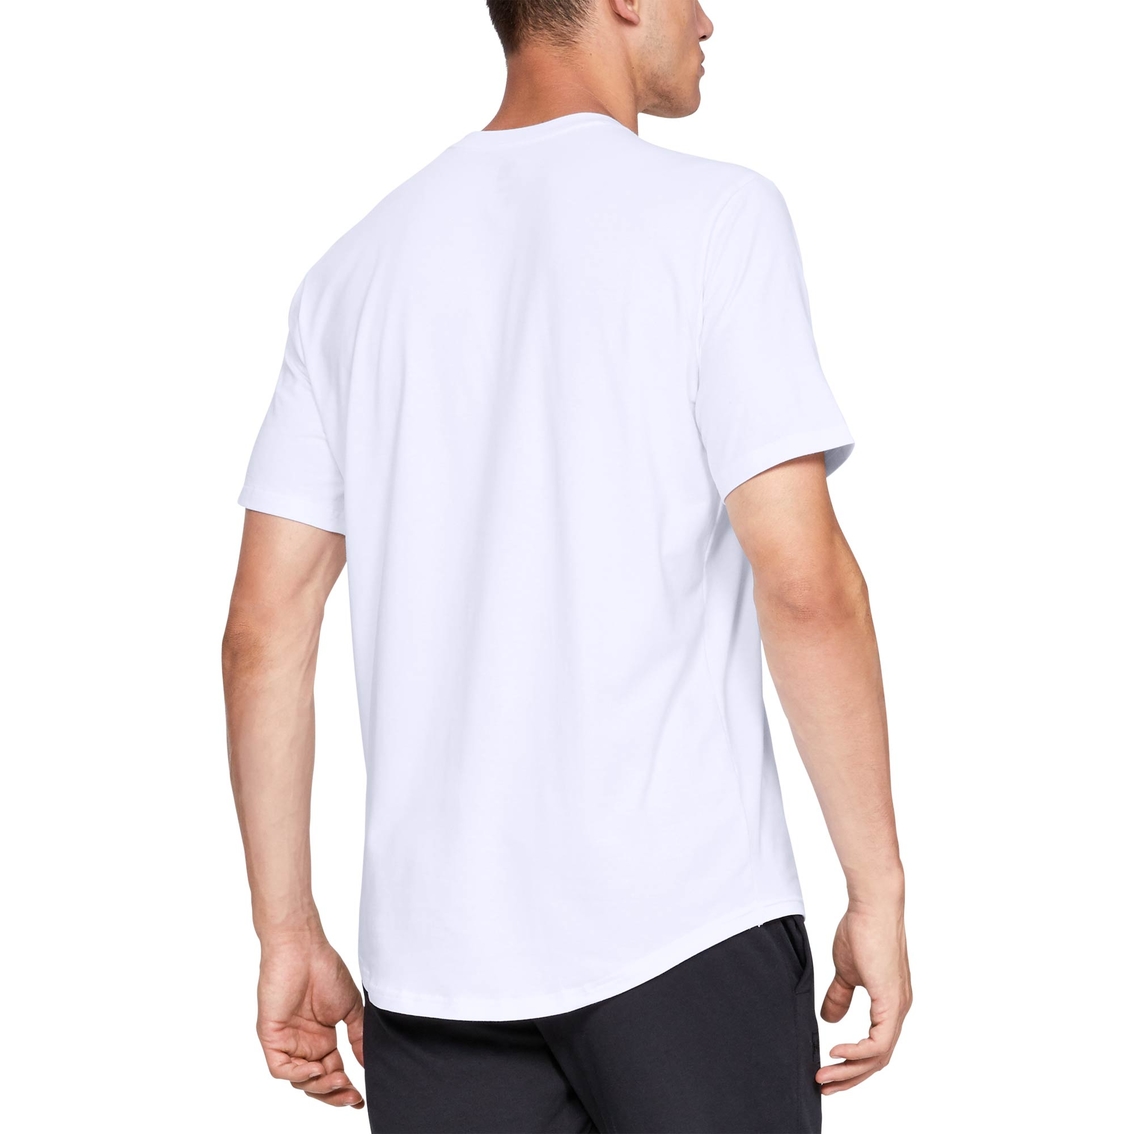 Under Armour Sportstyle Print Pocket Tee - Image 2 of 3